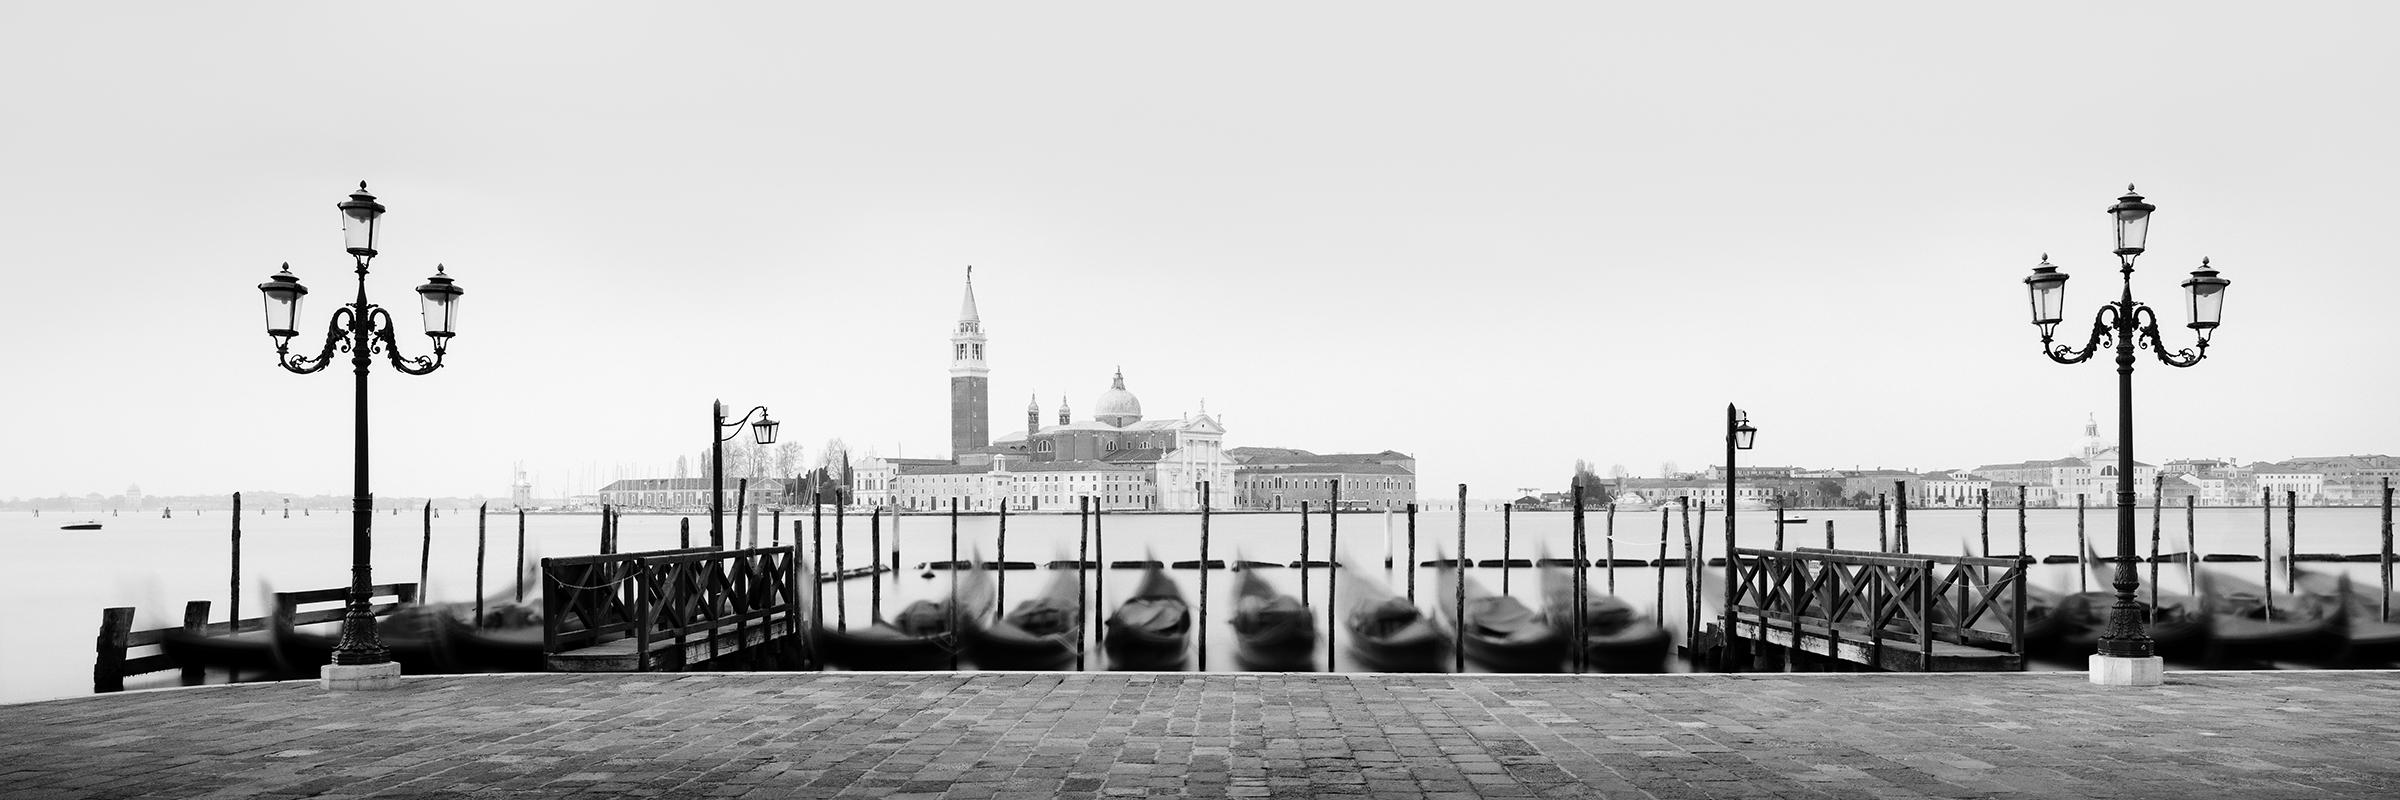 Between the Lights, Venice, black and white panorama art cityscape photography